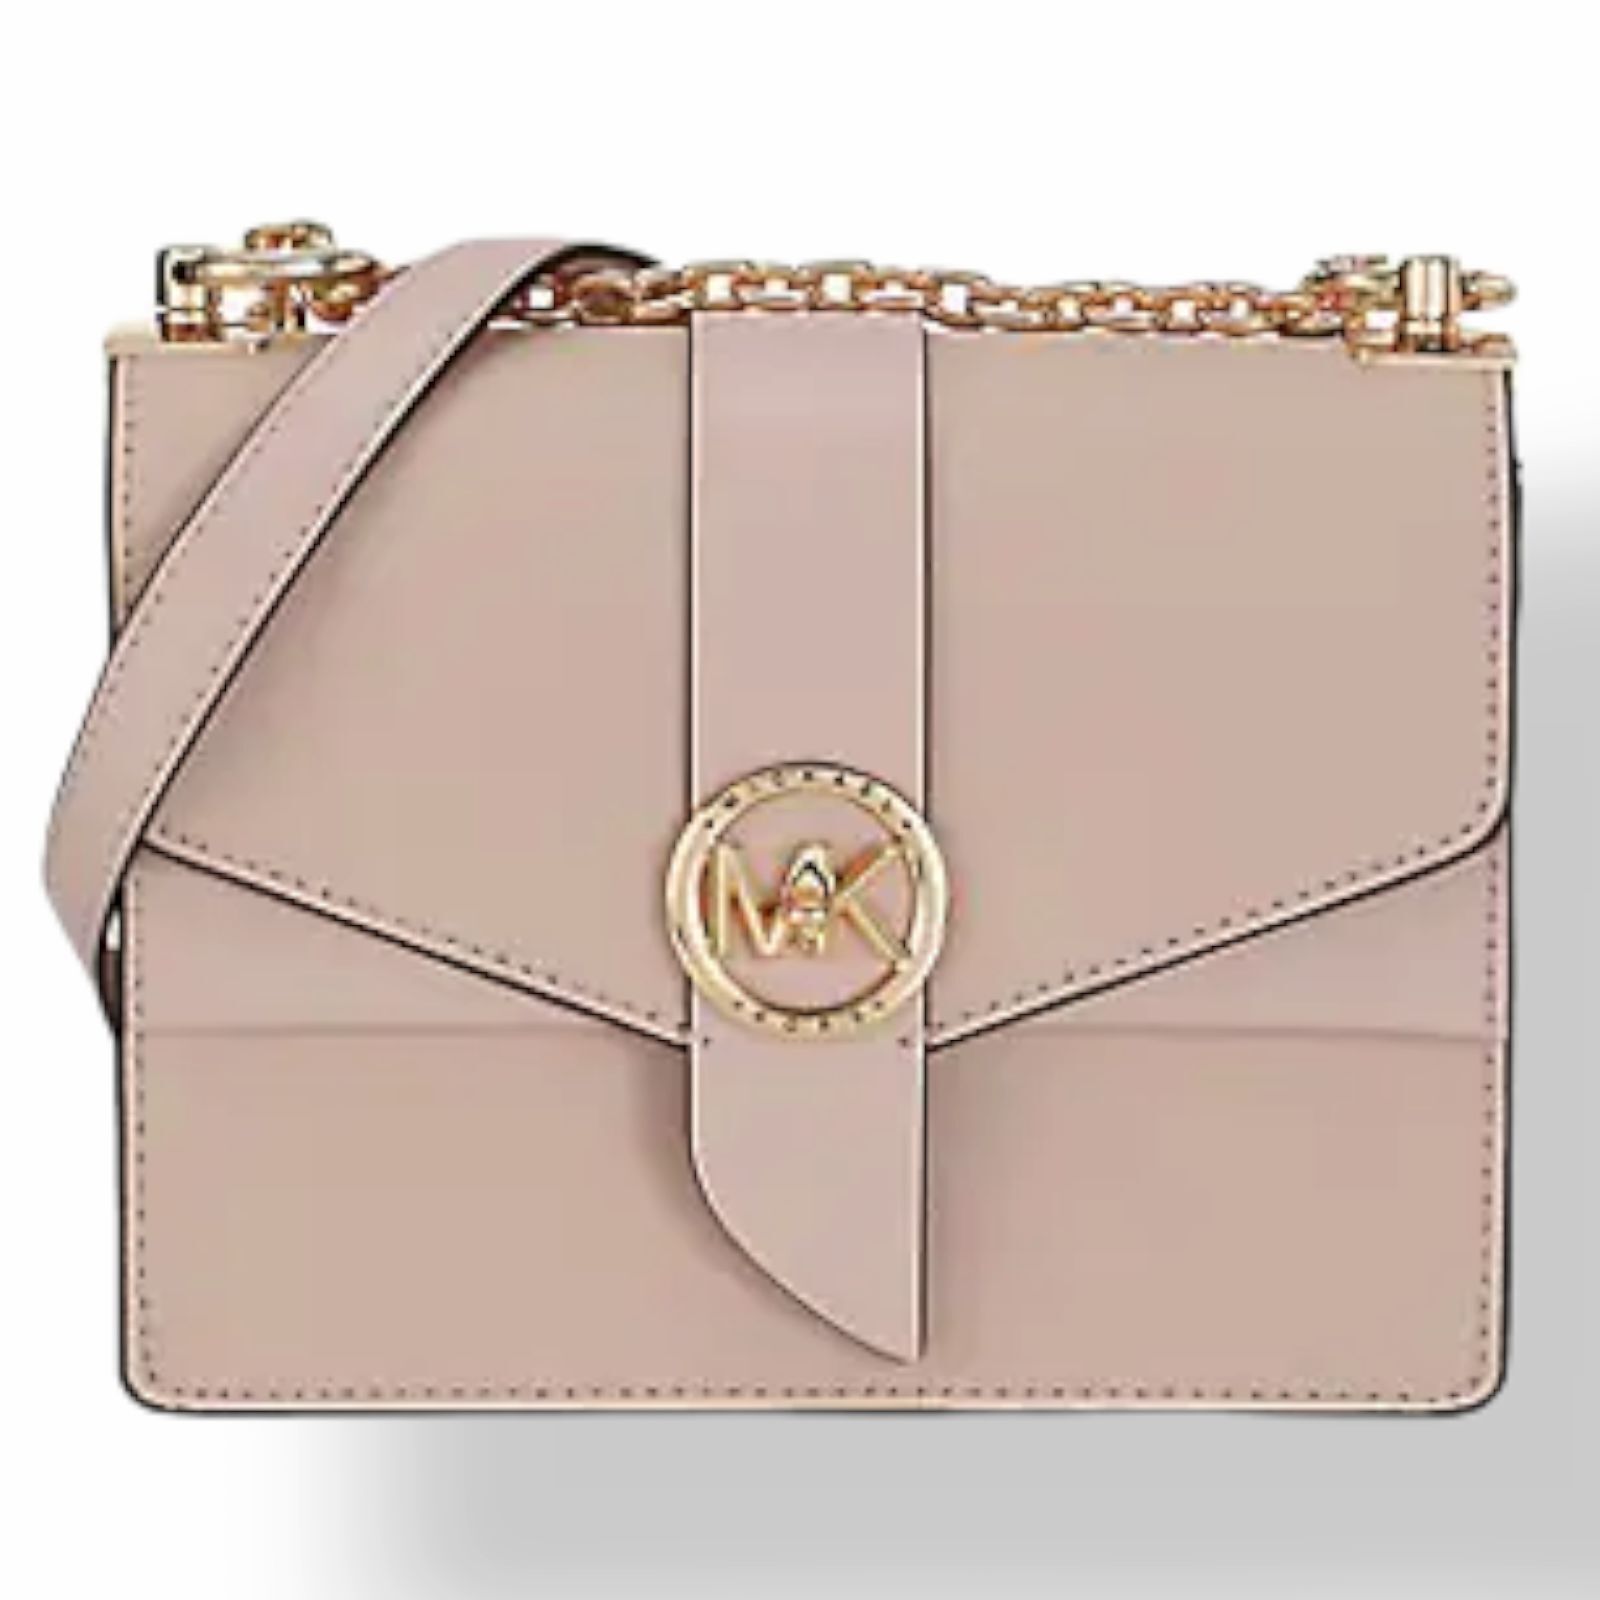 Michael Kors Ladies Greenwich Small Two-Tone Logo and Saffiano Leather Crossbody Bag